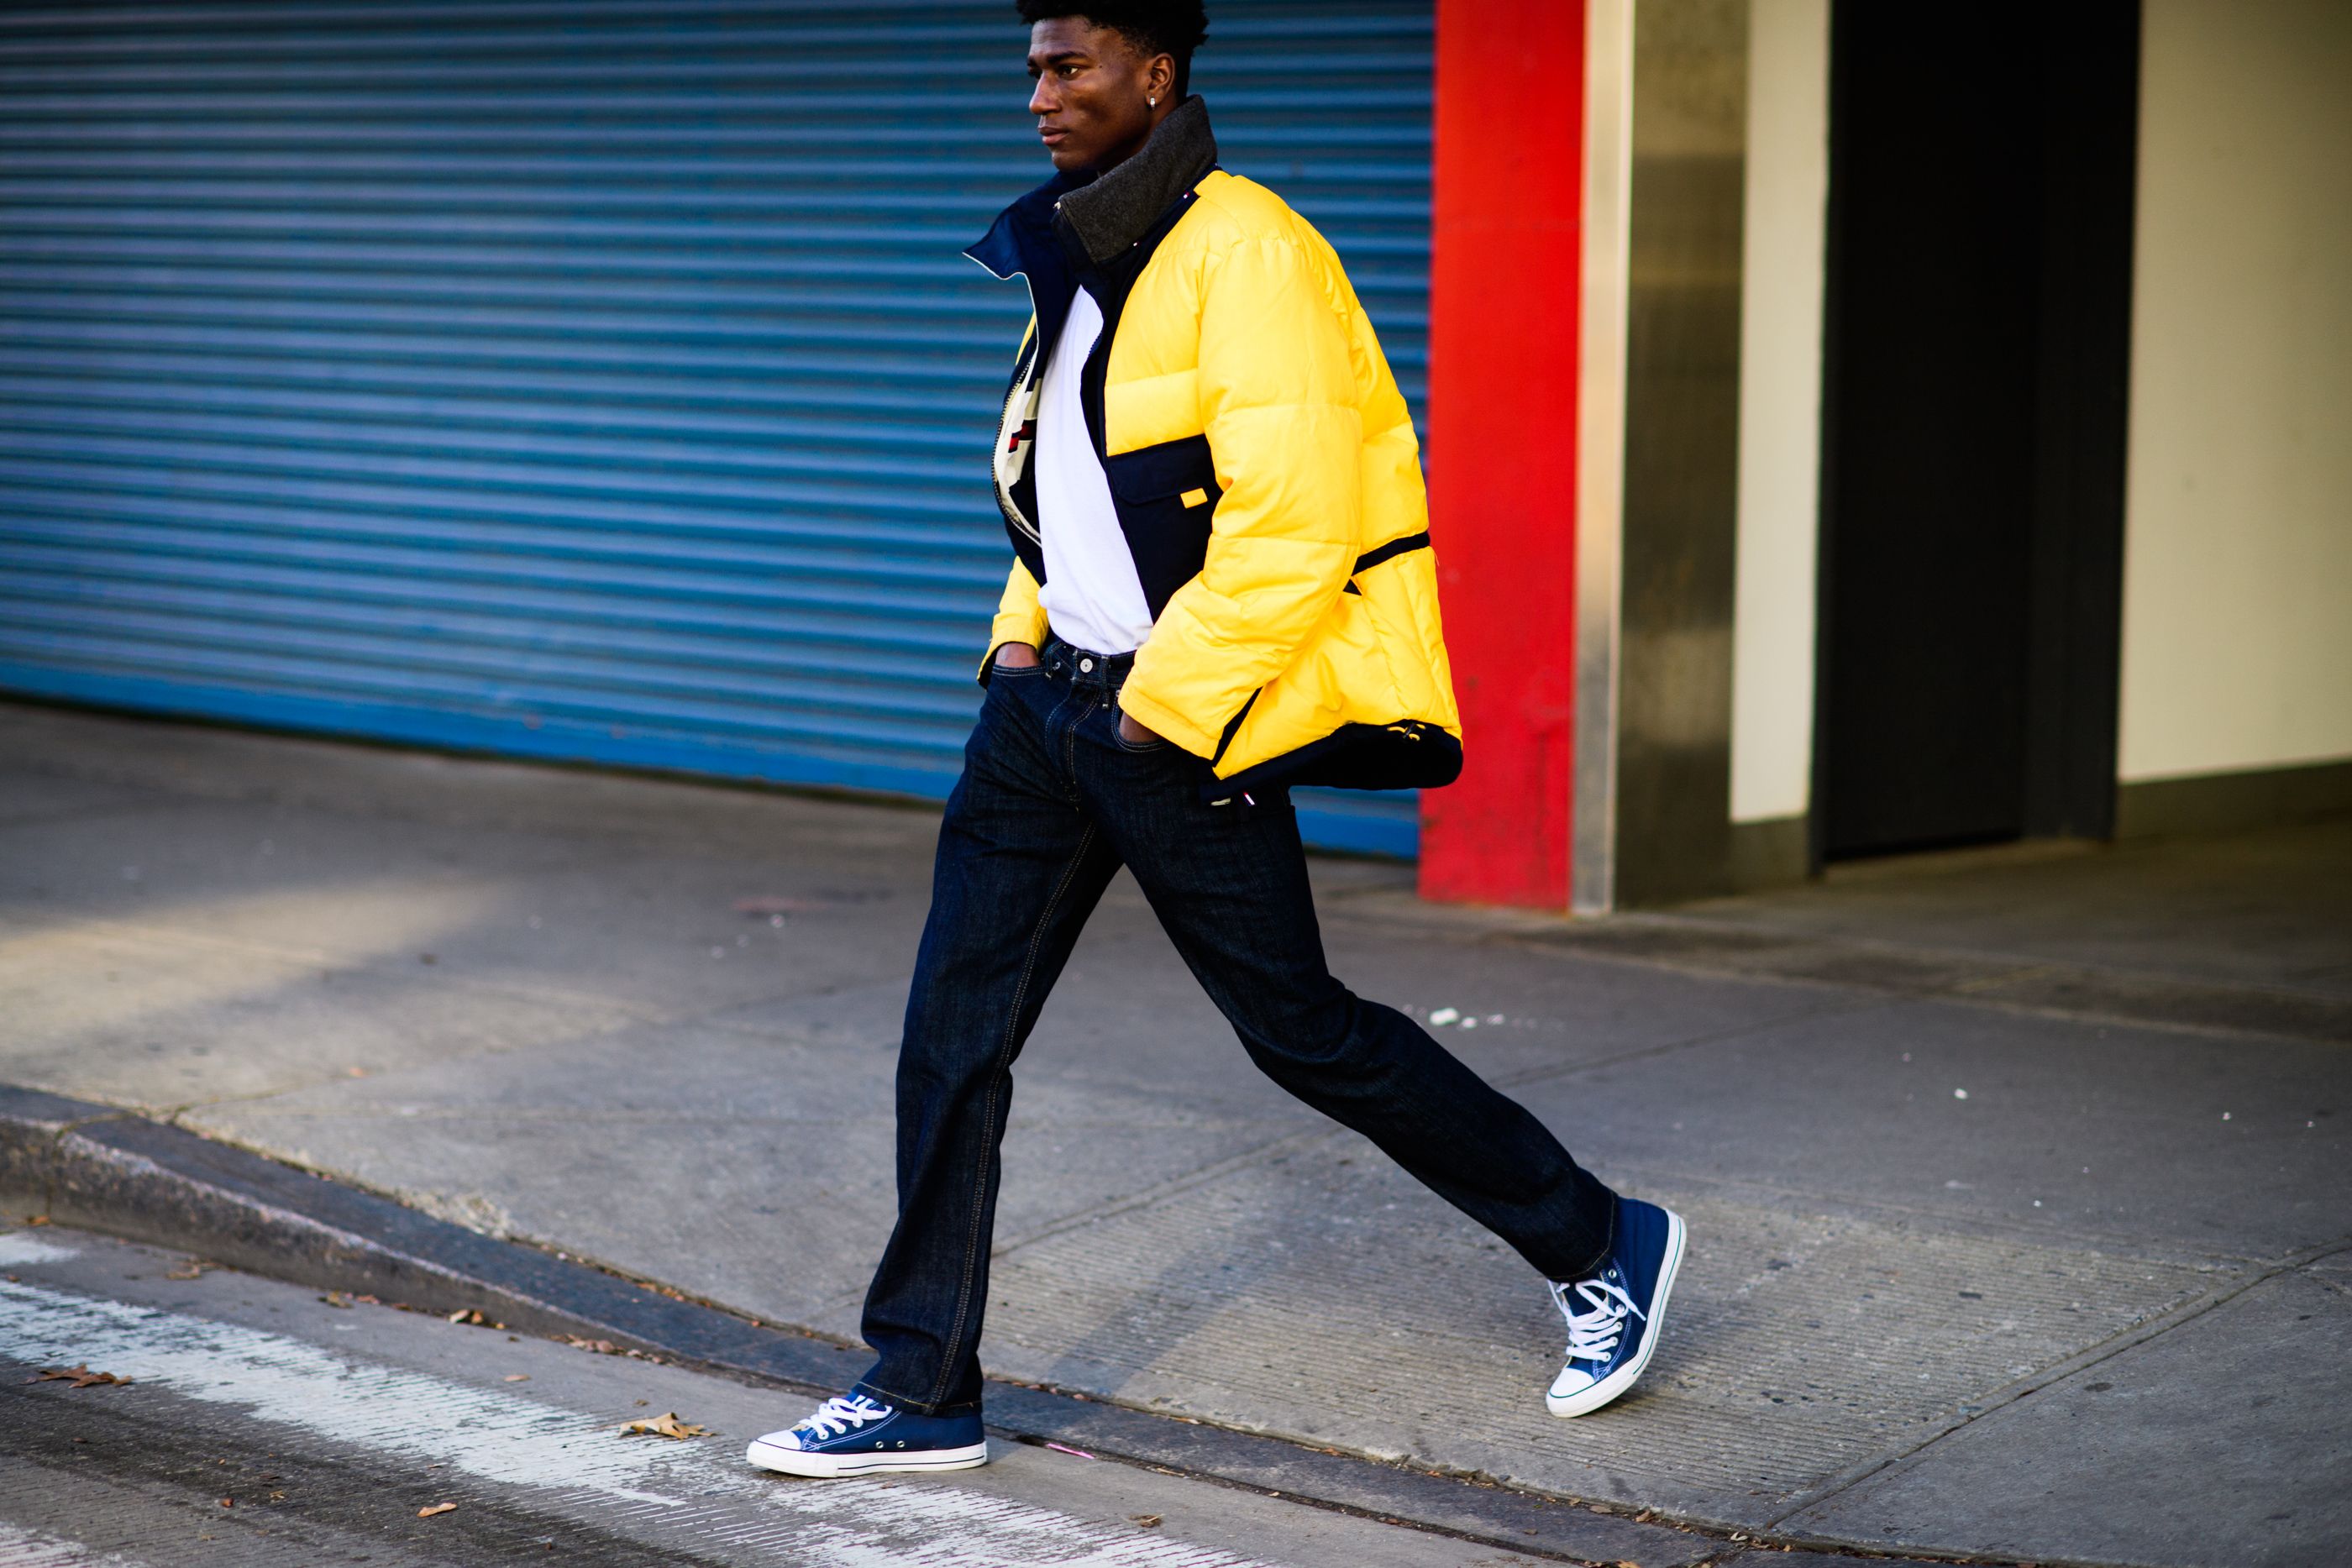 The Best Mens' Street Style Looks of 2018